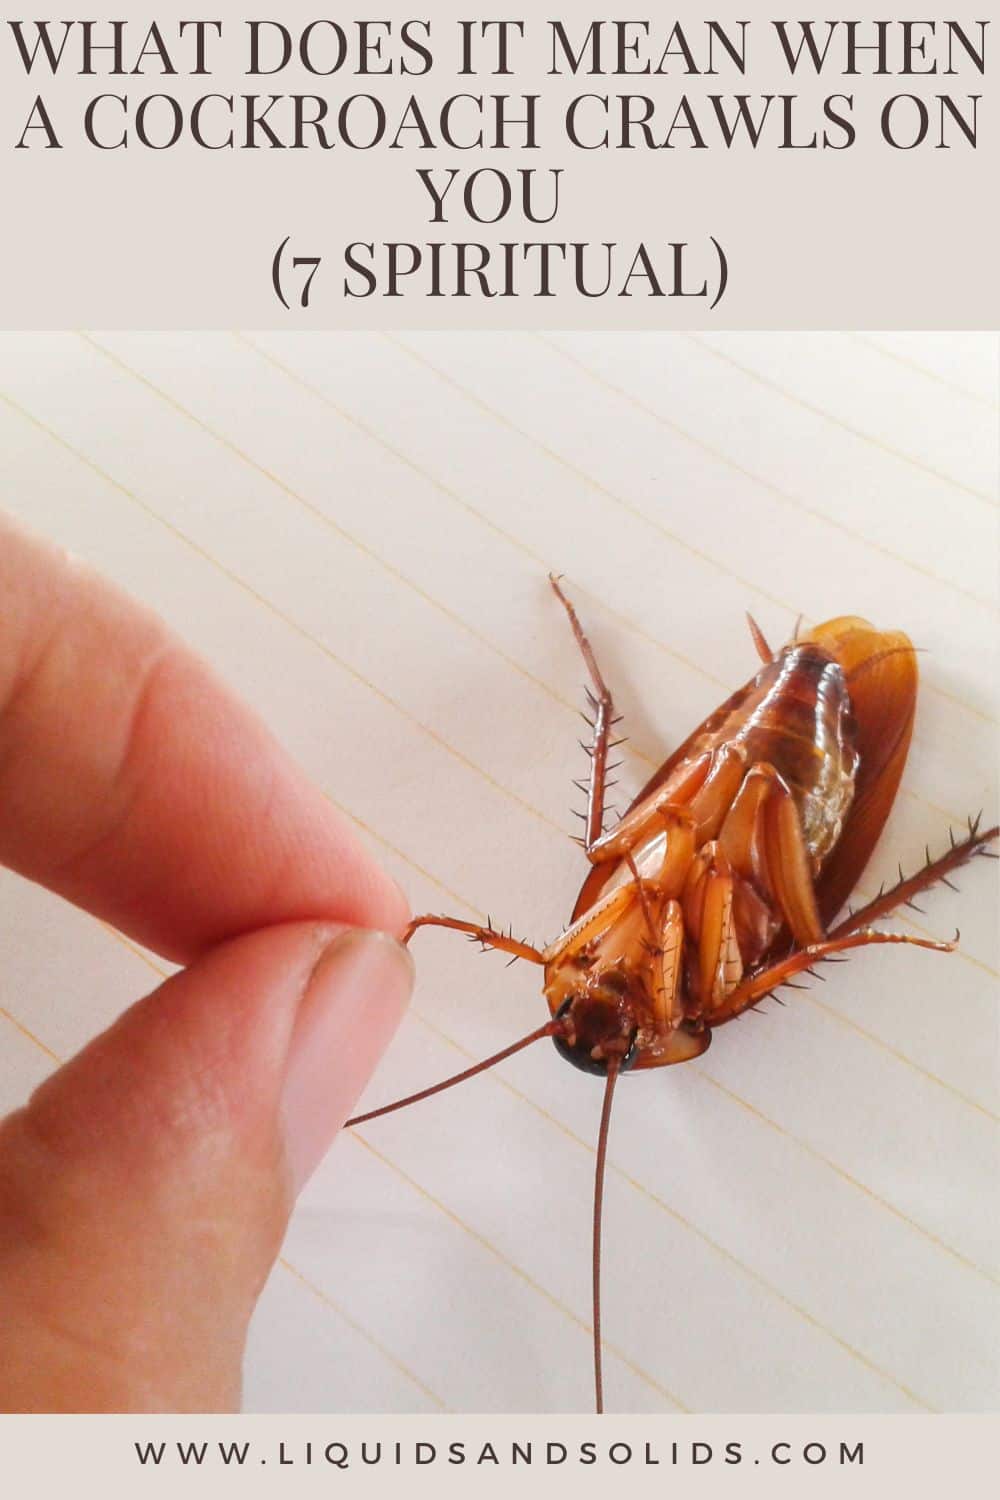 What Does It Mean When A Cockroach Crawls On You (7 Spiritual)